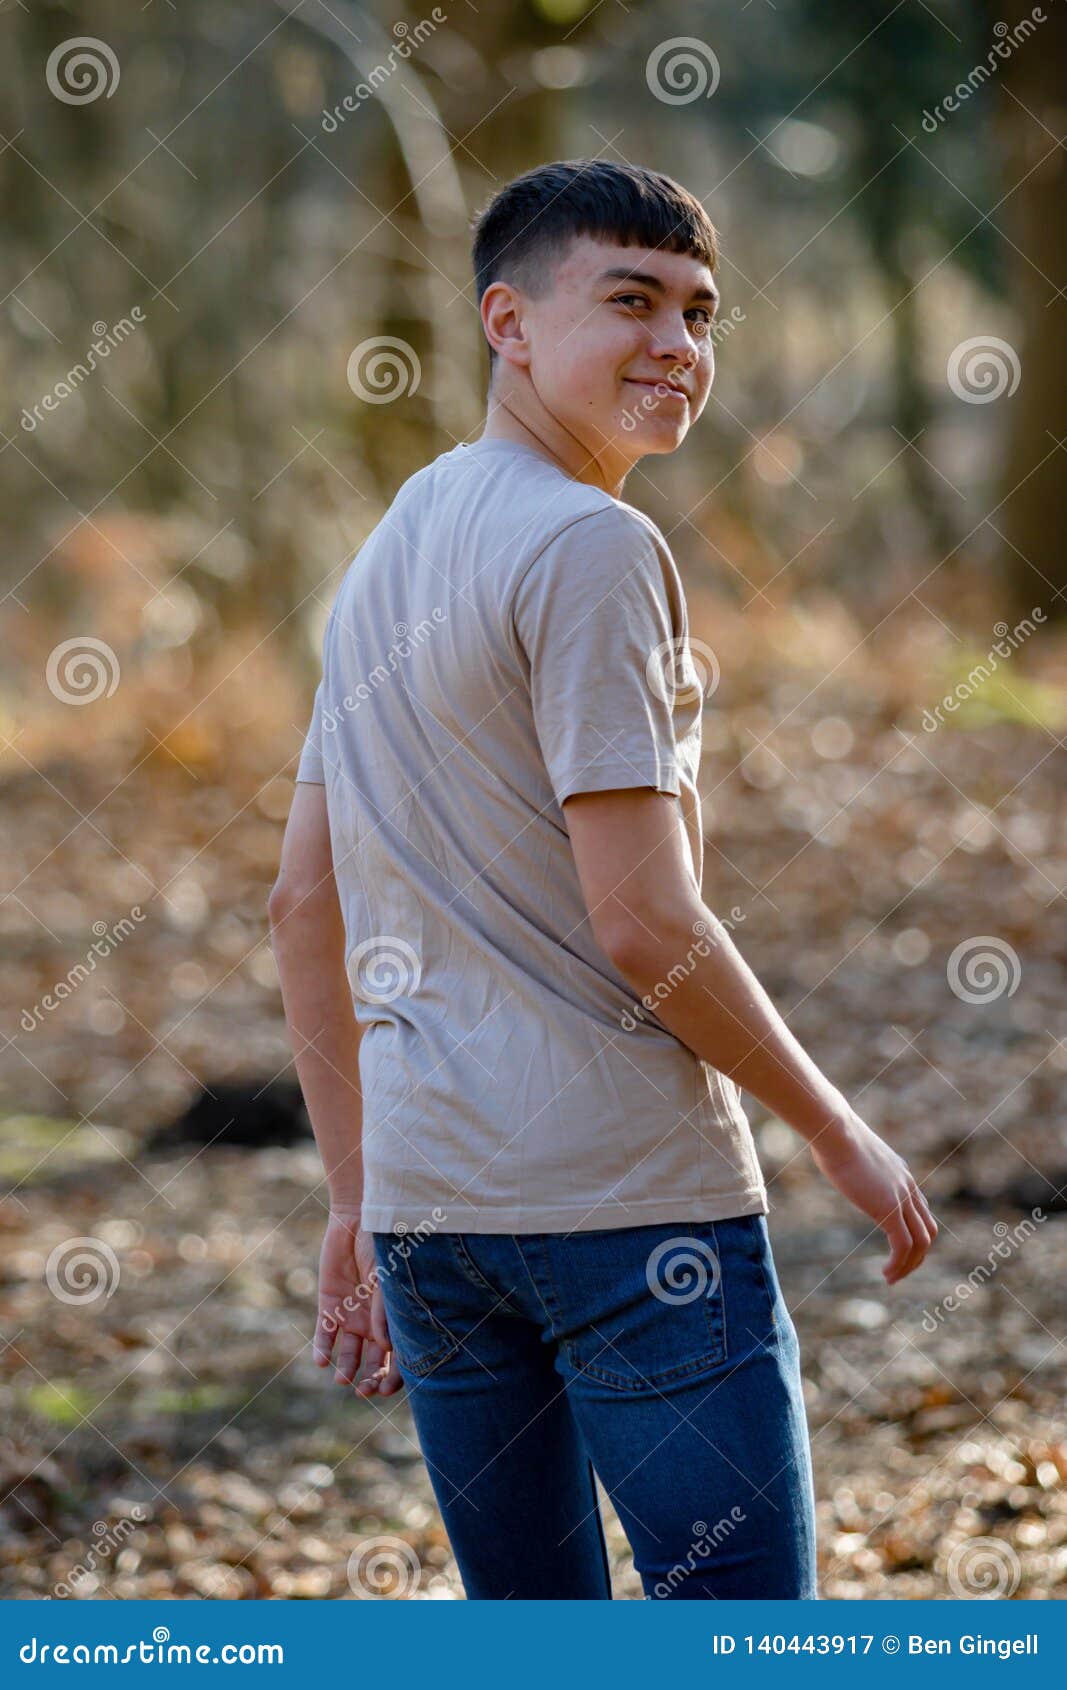 Teenage Boy Outside on a Bright Spring Day Stock Image - Image of space ...